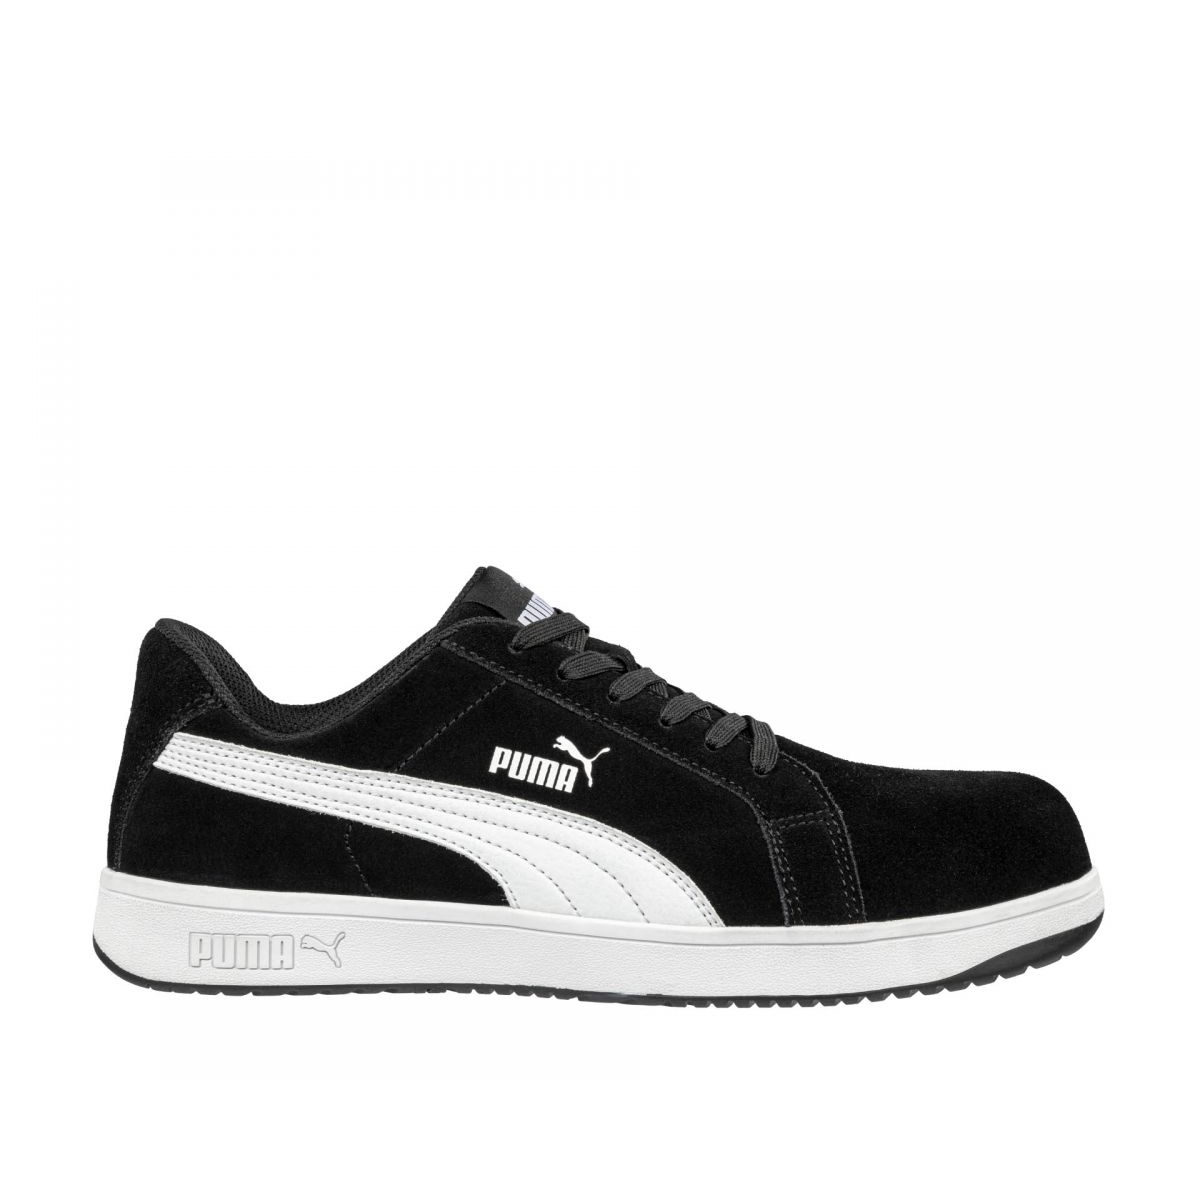 PUMA Safety Women's Iconic Low Composite Toe EH Work Shoes Black Suede - 640115 BLACK - BLACK, 8.5